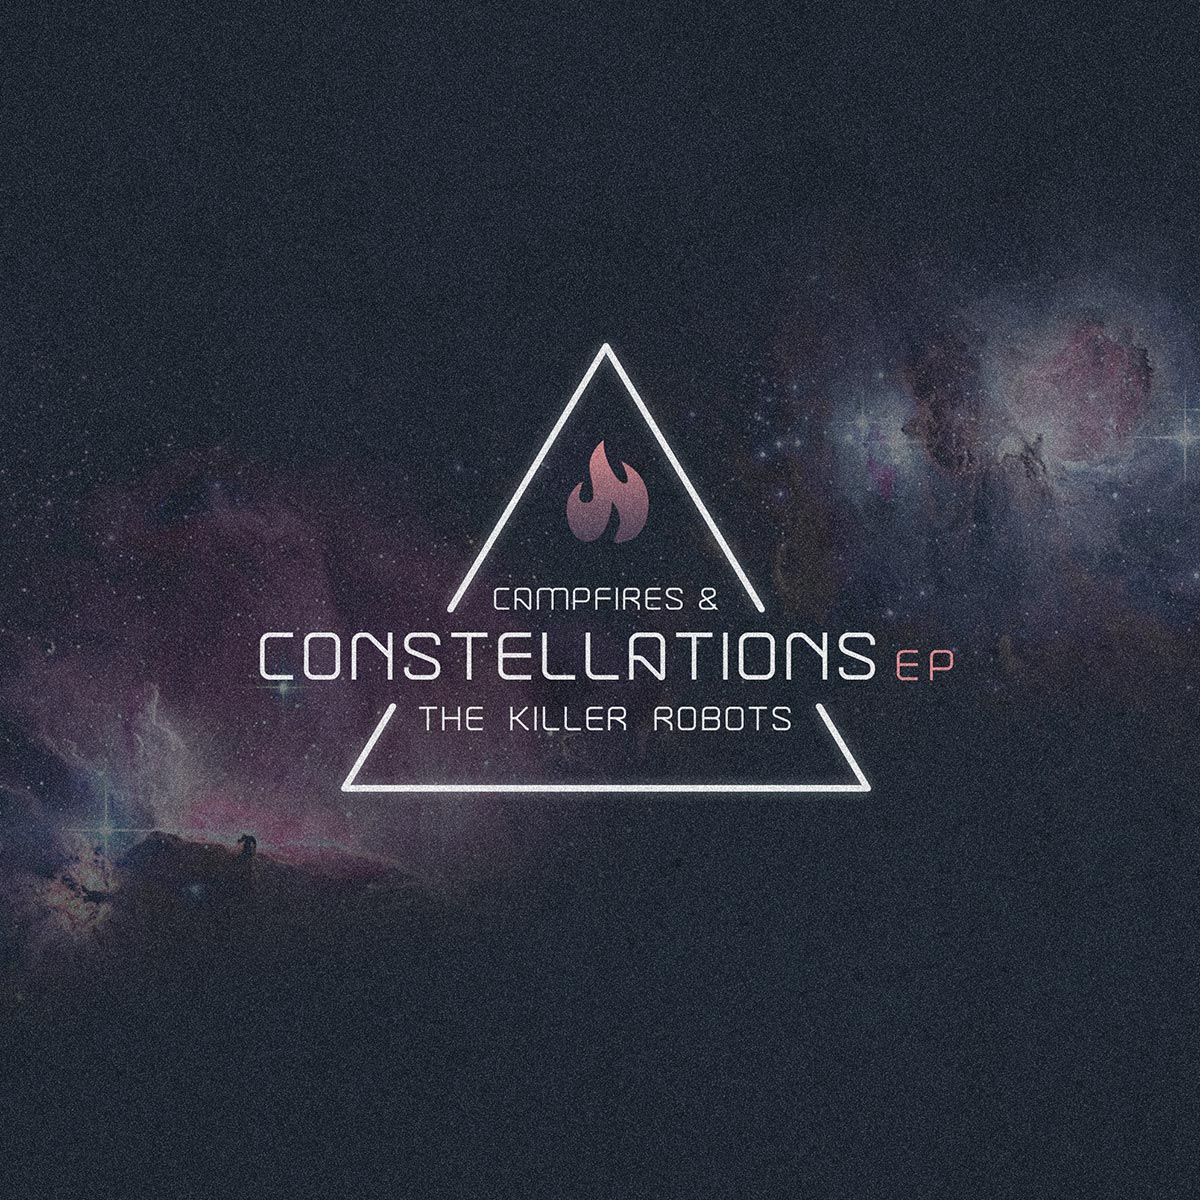 Campfires & Constellations EP Cover